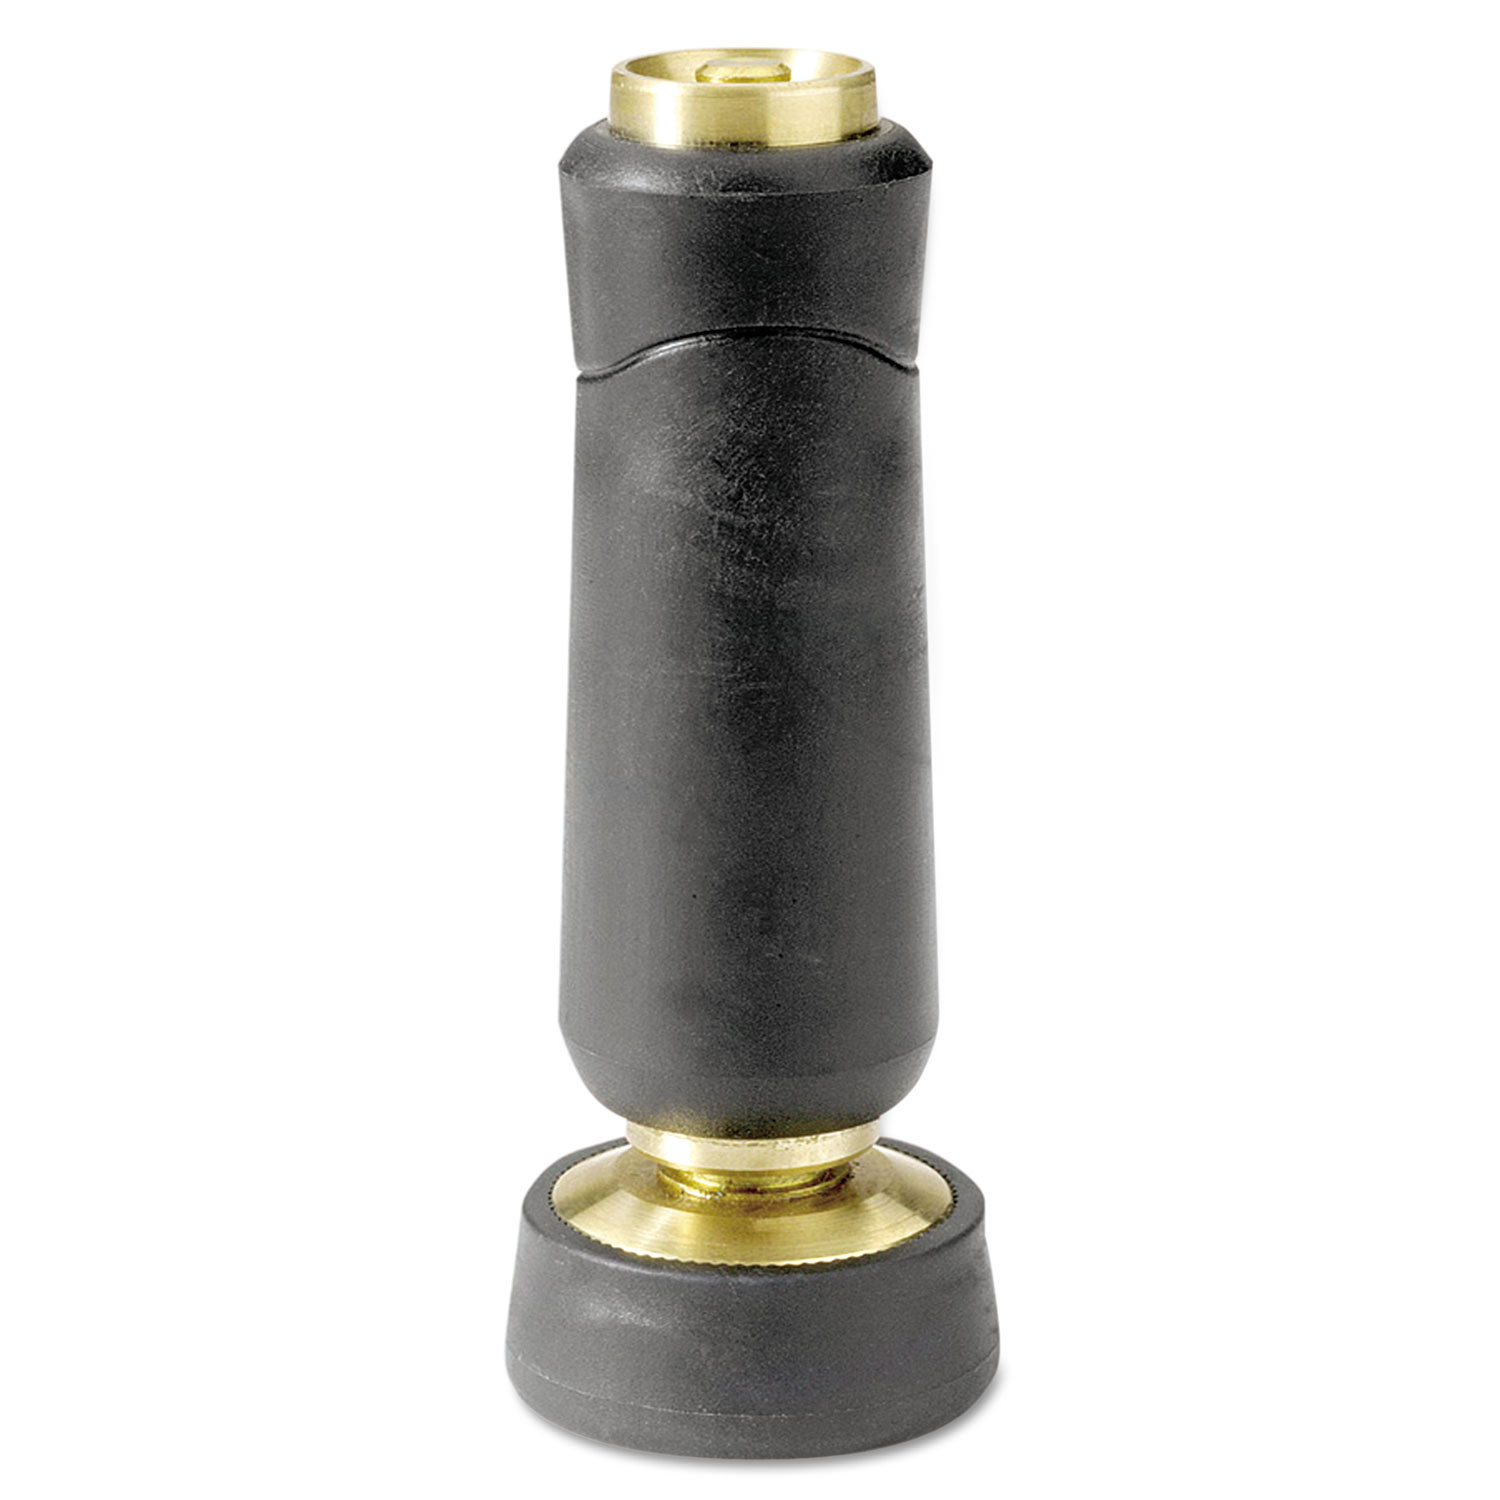  Gilmour 805282-1001 Straight Twist Nozzle, Brass/Rubber, Black (GLM528) 